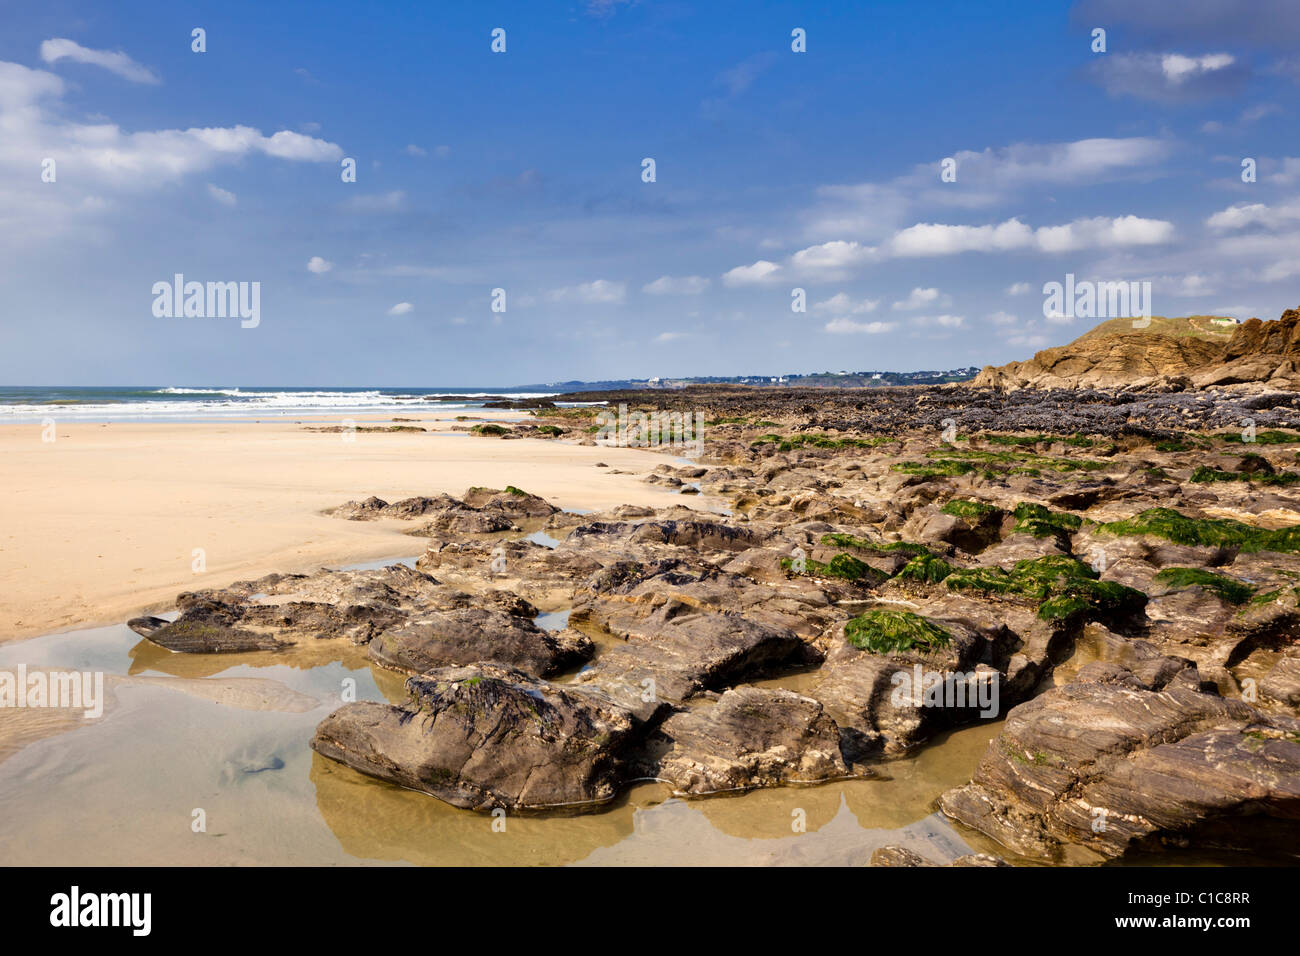 Brittany beaches, France - Beach and rocks at Guidel Plages, near Lorient, Morbihan, Brittany, France. Stock Photo